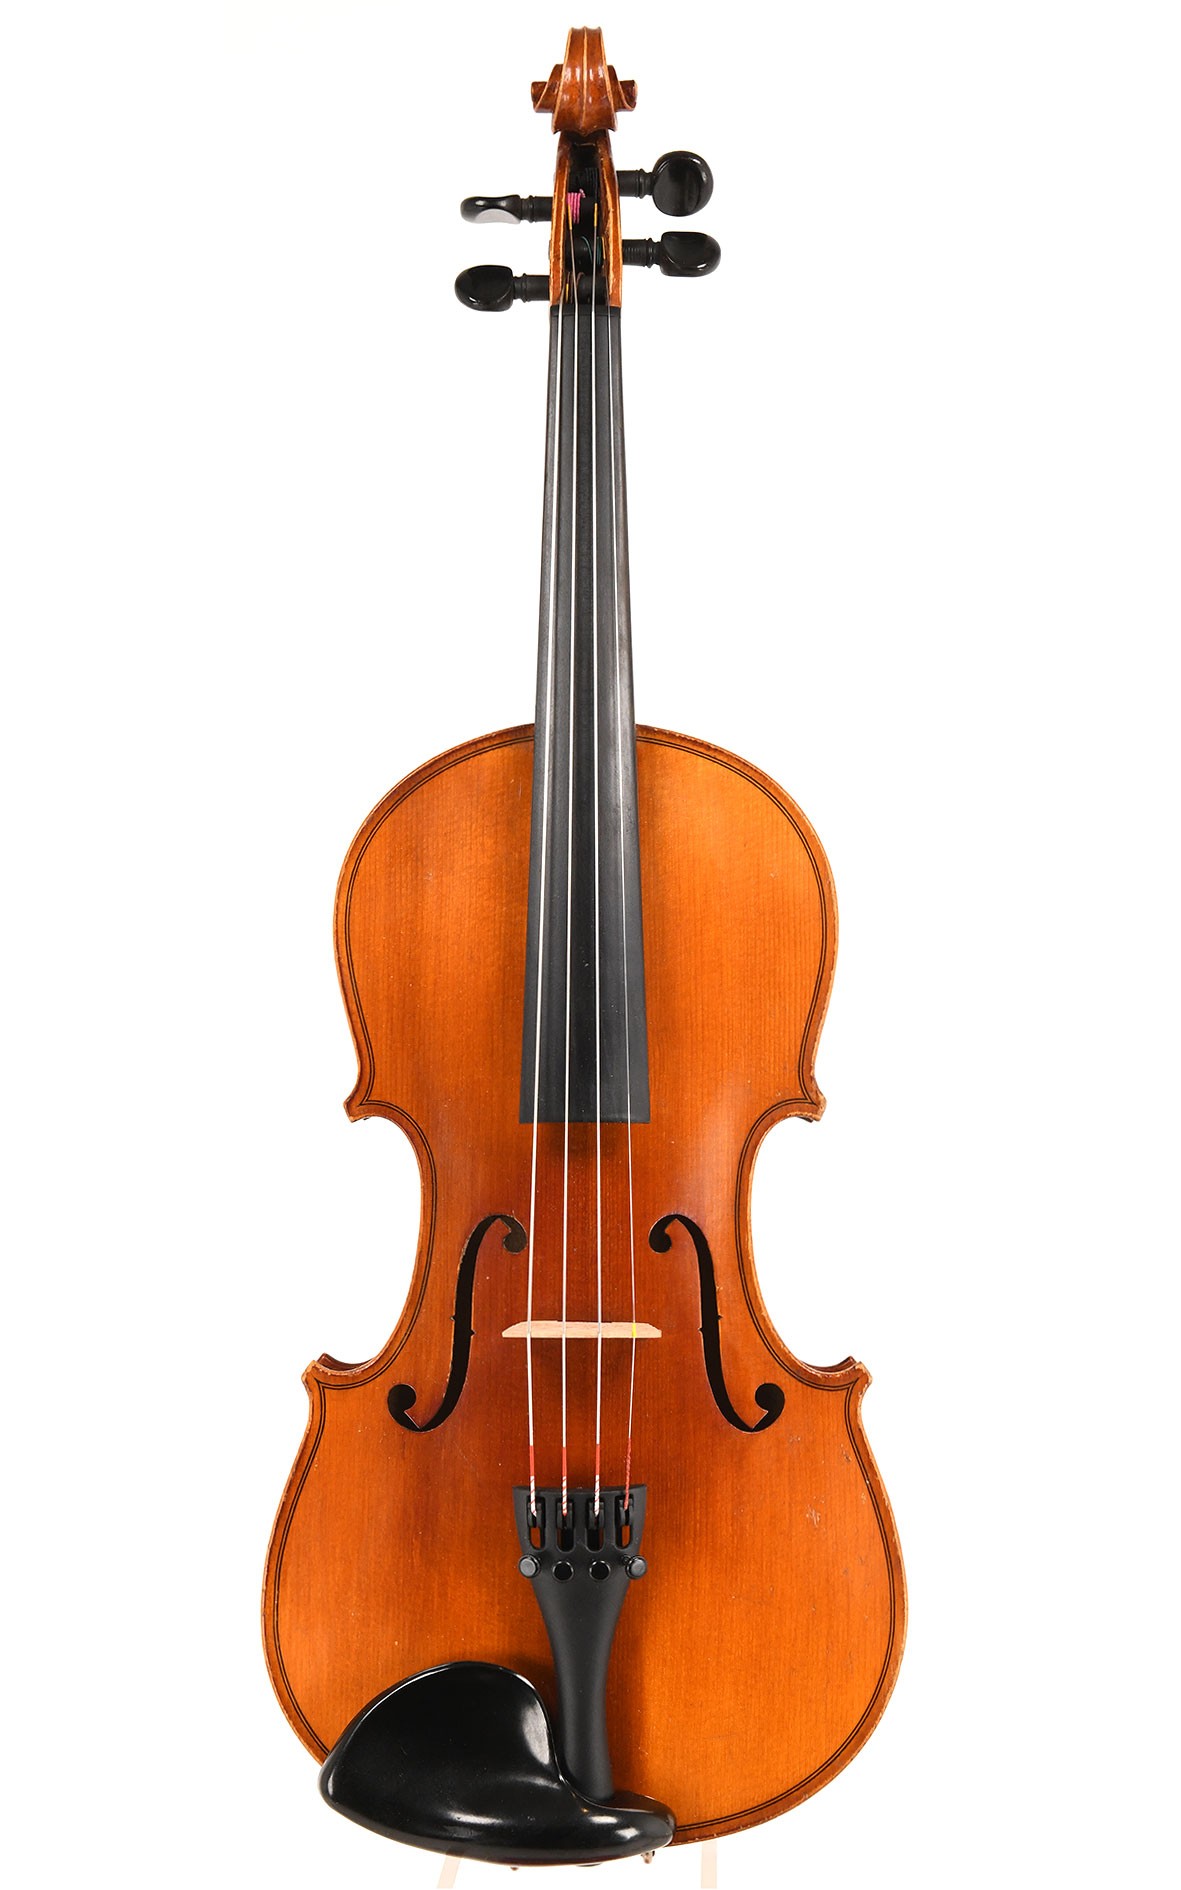 3/4 violin from Mittenwald, probably J. A. Baader